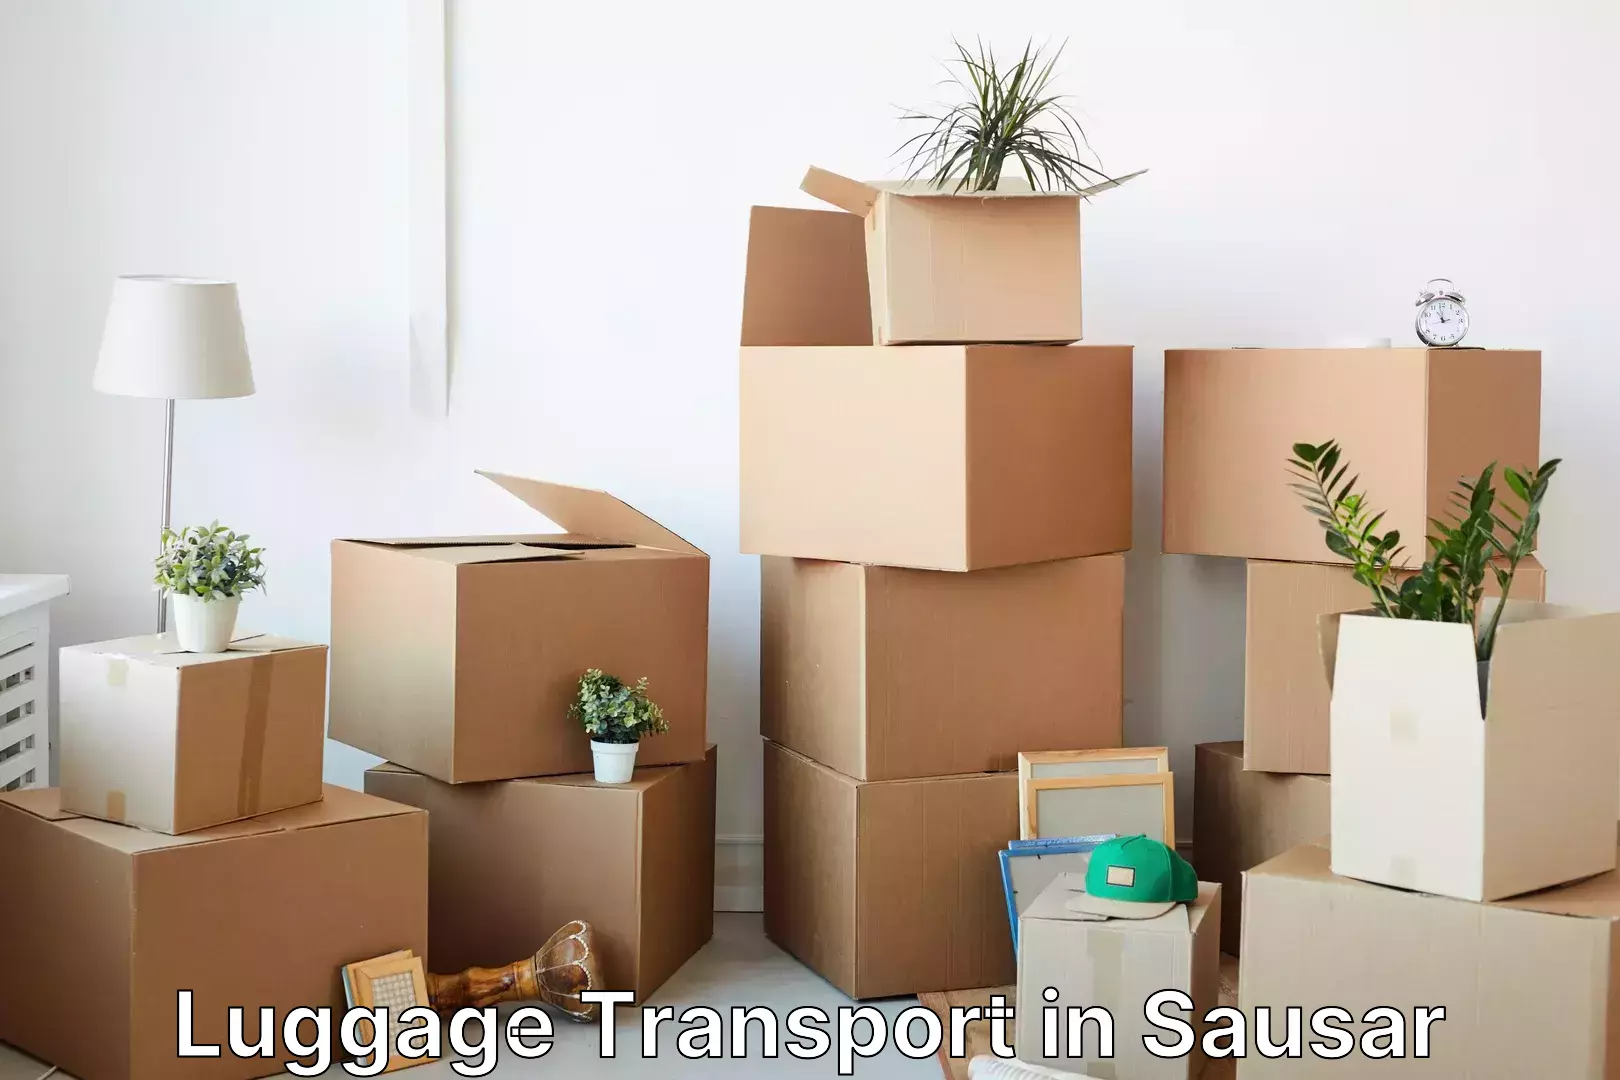 Baggage shipping experience in Sausar